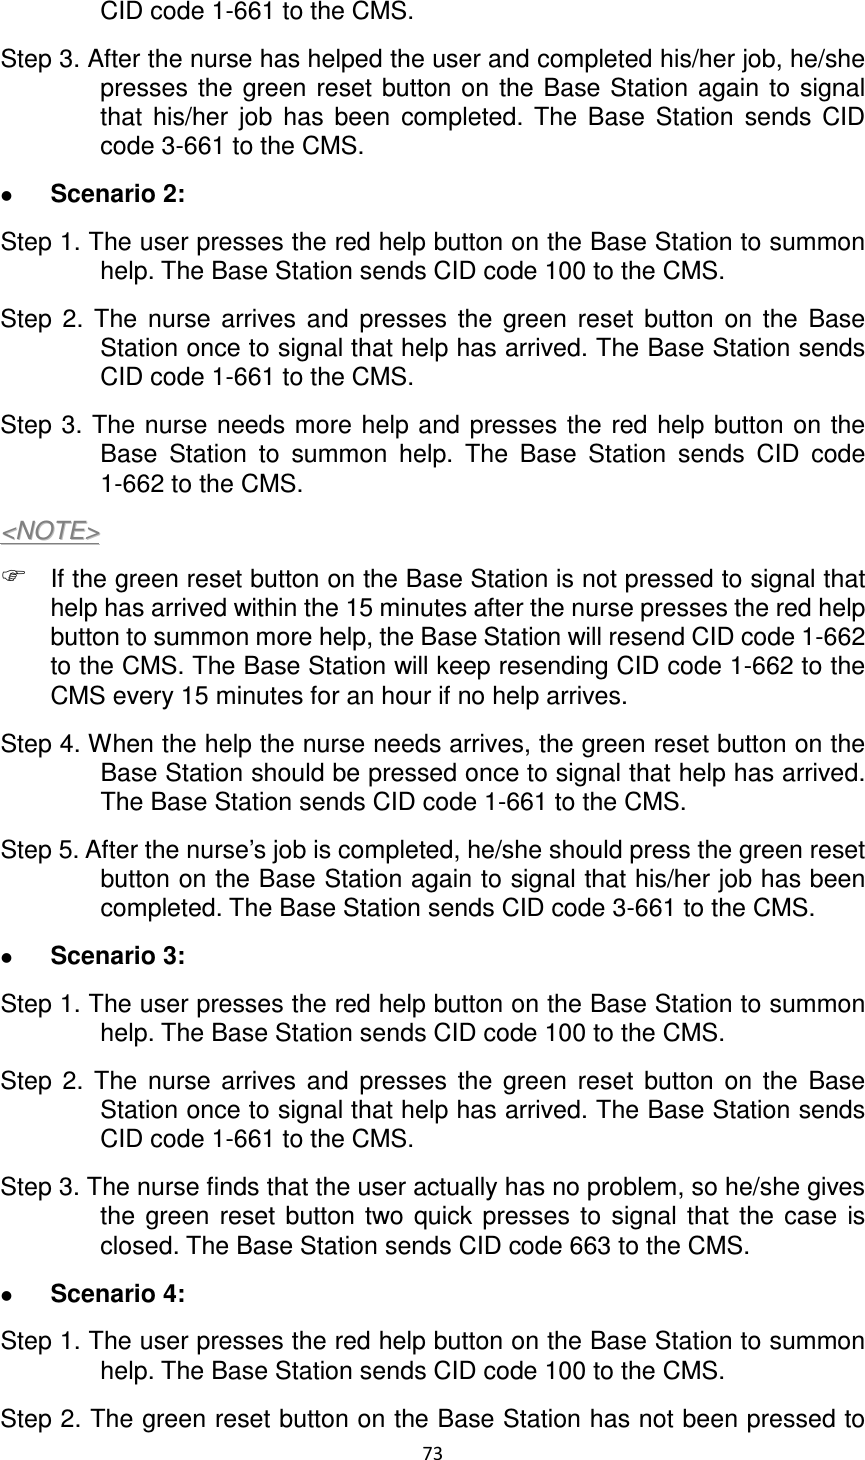 73  CID code 1-661 to the CMS.   Step 3. After the nurse has helped the user and completed his/her job, he/she presses  the  green  reset  button on  the Base Station again  to  signal that  his/her  job  has  been  completed.  The  Base  Station  sends  CID code 3-661 to the CMS.      Scenario 2:   Step 1. The user presses the red help button on the Base Station to summon help. The Base Station sends CID code 100 to the CMS.   Step  2.  The  nurse  arrives  and  presses  the  green  reset  button  on  the  Base Station once to signal that help has arrived. The Base Station sends CID code 1-661 to the CMS.   Step 3. The nurse needs more help and presses the red  help button on  the Base  Station  to  summon  help.  The  Base  Station  sends  CID  code 1-662 to the CMS.   &lt;&lt;NNOOTTEE&gt;&gt;   If the green reset button on the Base Station is not pressed to signal that help has arrived within the 15 minutes after the nurse presses the red help button to summon more help, the Base Station will resend CID code 1-662 to the CMS. The Base Station will keep resending CID code 1-662 to the CMS every 15 minutes for an hour if no help arrives.   Step 4. When the help the nurse needs arrives, the green reset button on the Base Station should be pressed once to signal that help has arrived. The Base Station sends CID code 1-661 to the CMS. Step 5. After the nurse’s job is completed, he/she should press the green reset button on the Base Station again to signal that his/her job has been completed. The Base Station sends CID code 3-661 to the CMS.    Scenario 3: Step 1. The user presses the red help button on the Base Station to summon help. The Base Station sends CID code 100 to the CMS.   Step  2.  The  nurse  arrives  and  presses  the  green  reset  button  on  the  Base Station once to signal that help has arrived. The Base Station sends CID code 1-661 to the CMS.   Step 3. The nurse finds that the user actually has no problem, so he/she gives the  green  reset  button  two  quick  presses  to  signal  that  the  case  is closed. The Base Station sends CID code 663 to the CMS.    Scenario 4:   Step 1. The user presses the red help button on the Base Station to summon help. The Base Station sends CID code 100 to the CMS.   Step 2. The green reset button on the Base Station has not been pressed to 